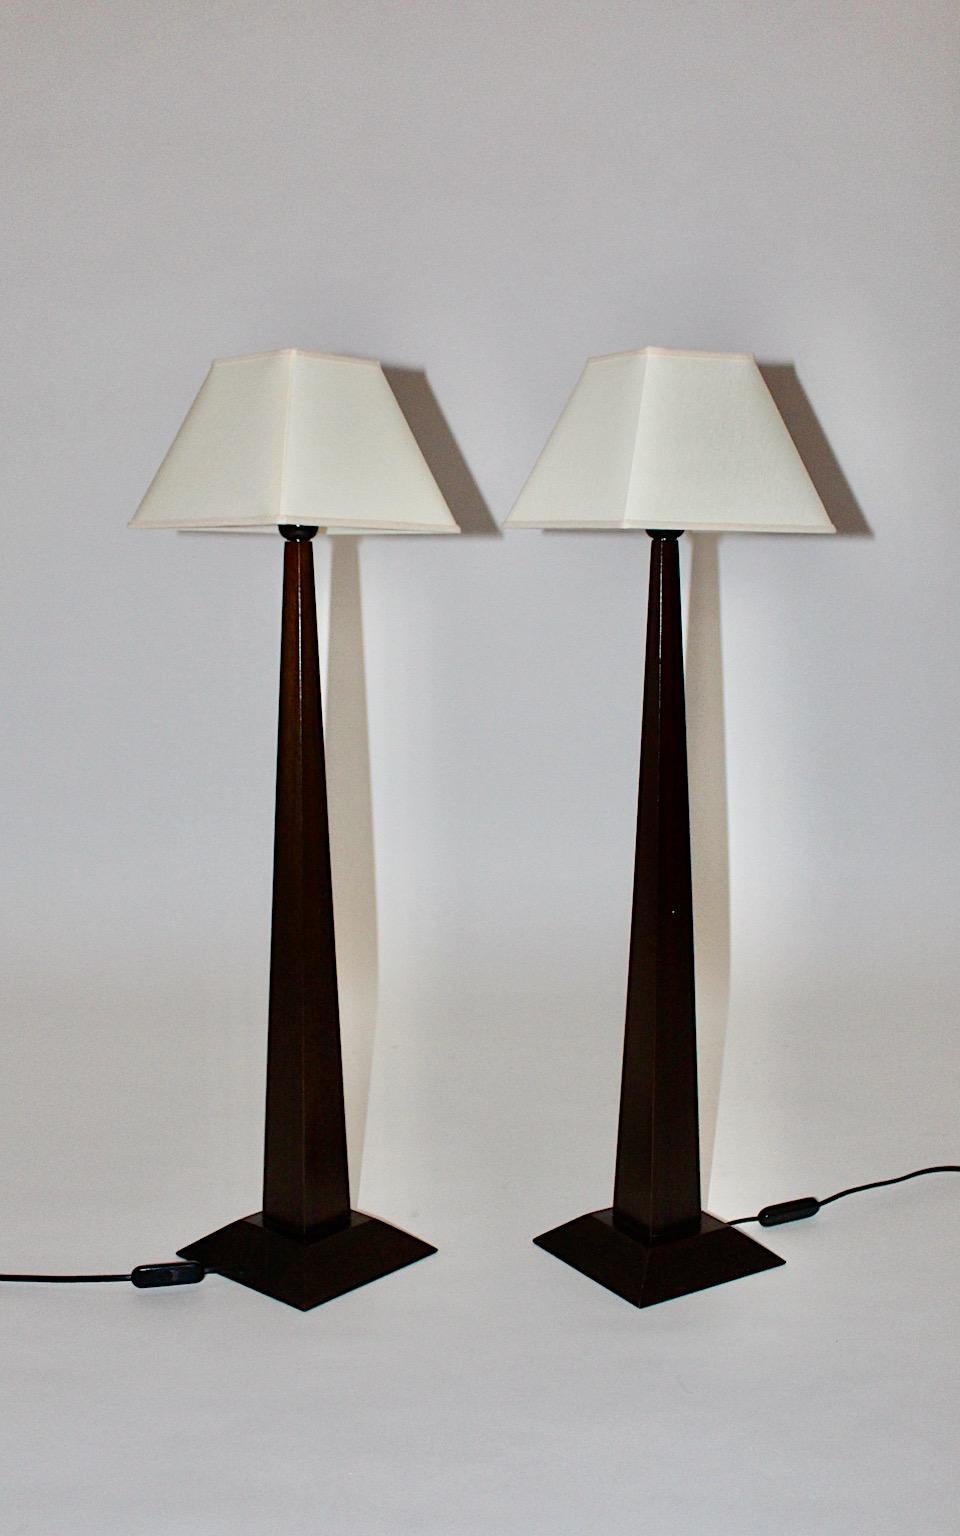 French modern pair of obelisk table lamp by Atelier Lumen Creation Luc Rabault 1980s, France from stained beech wood with rectangular lamp shades in butter cream color.
The color different between dark wood stem and the light colored lamp shades